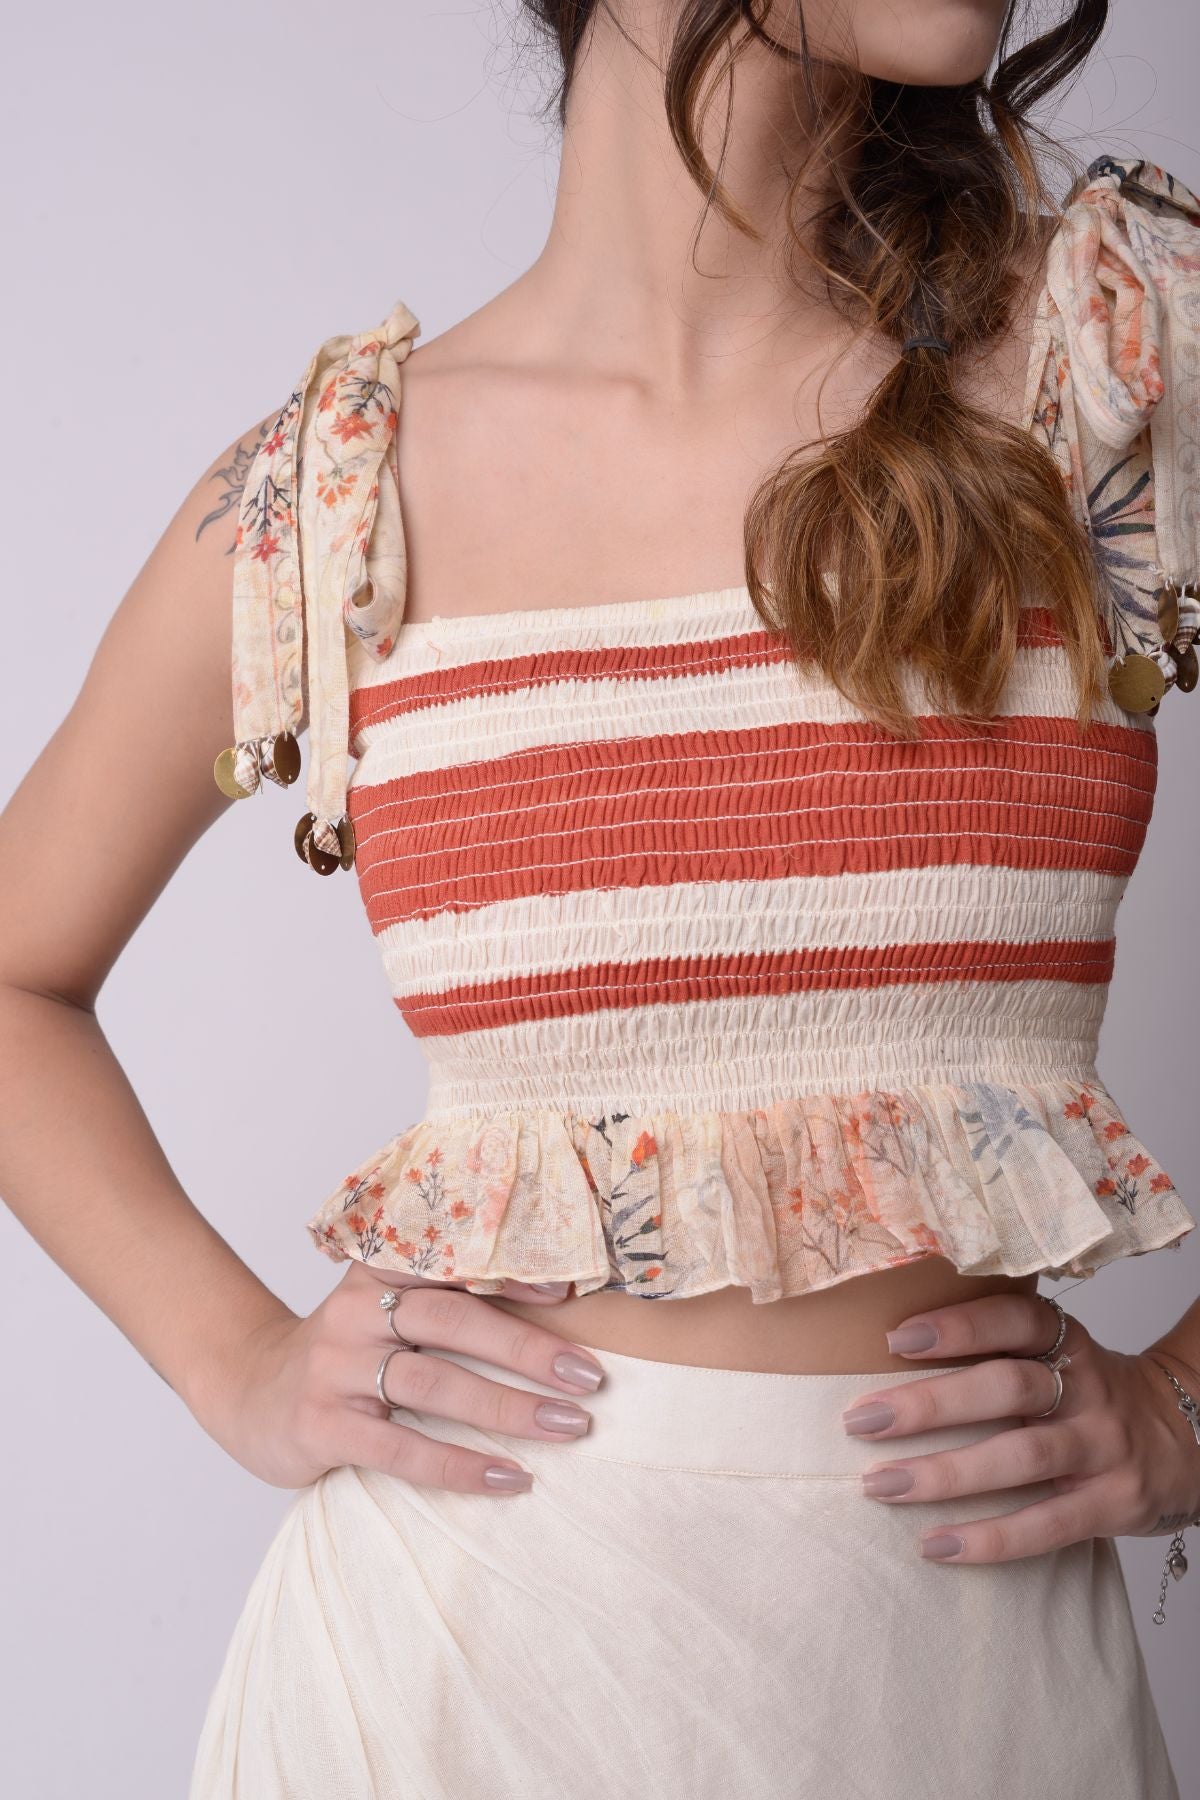 Asymmetrical Ruffle Skirt With Patchwork Smocking Crop Top